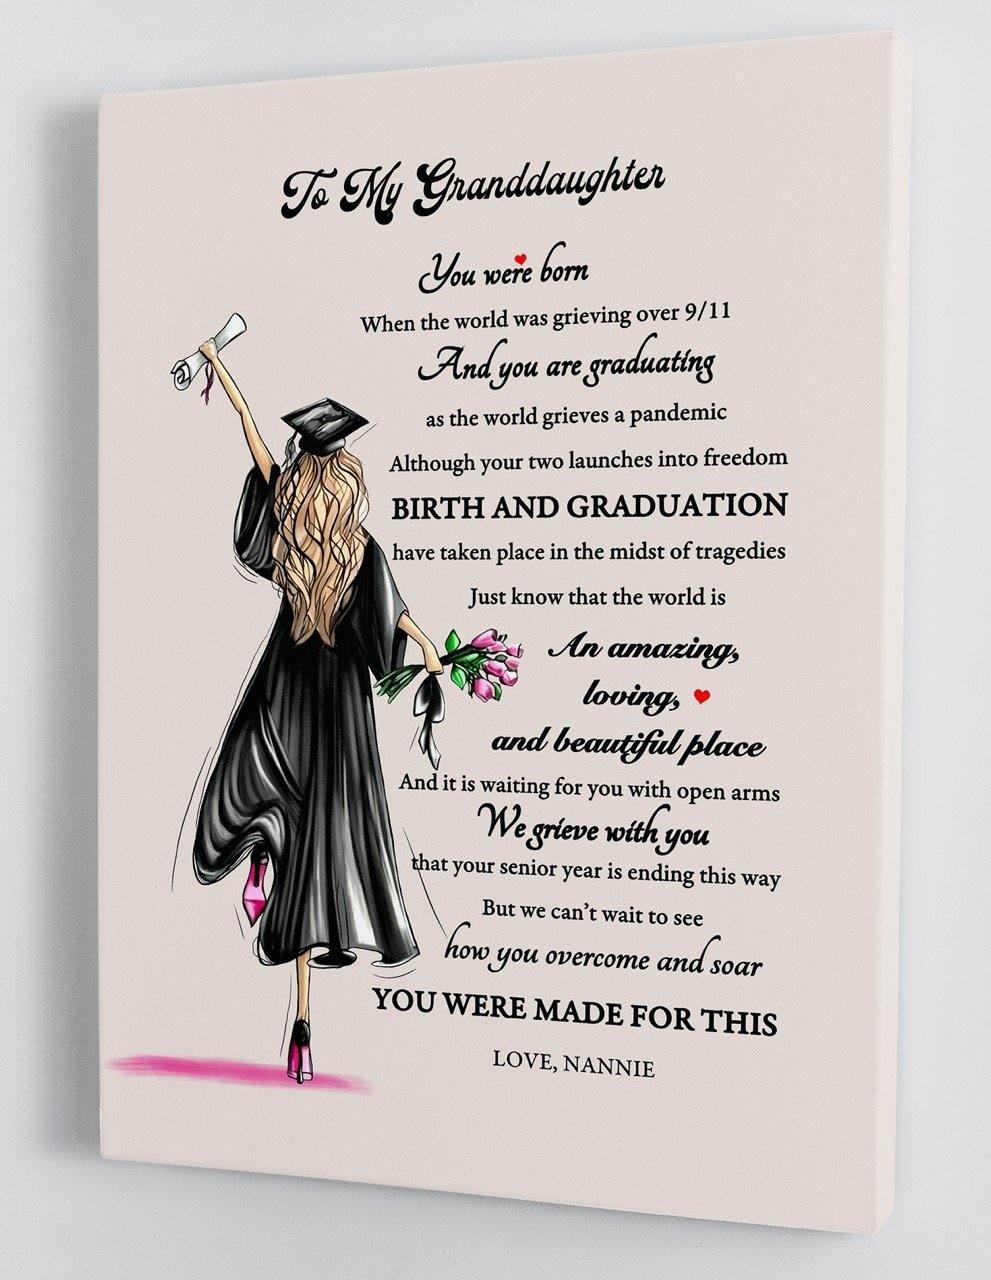 To My Granddaughter Senior 2021 - From Nannie - Graduation Framed Canvas Gift GMD015 - DivesArt LLC